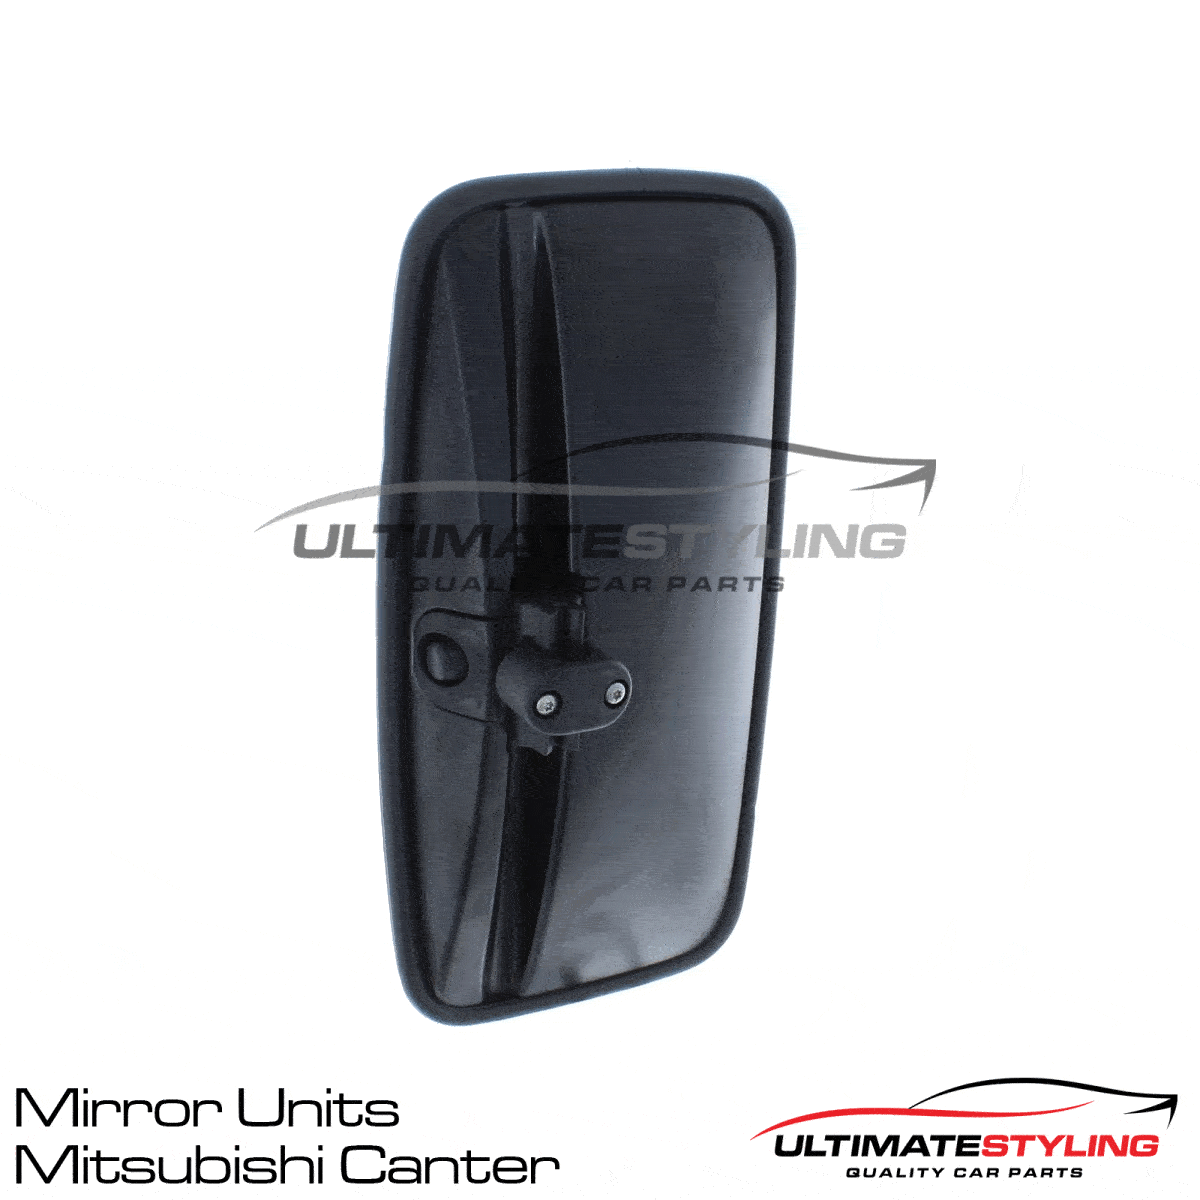 360 view of a Mitsubishi Canter Wing Mirror replacement